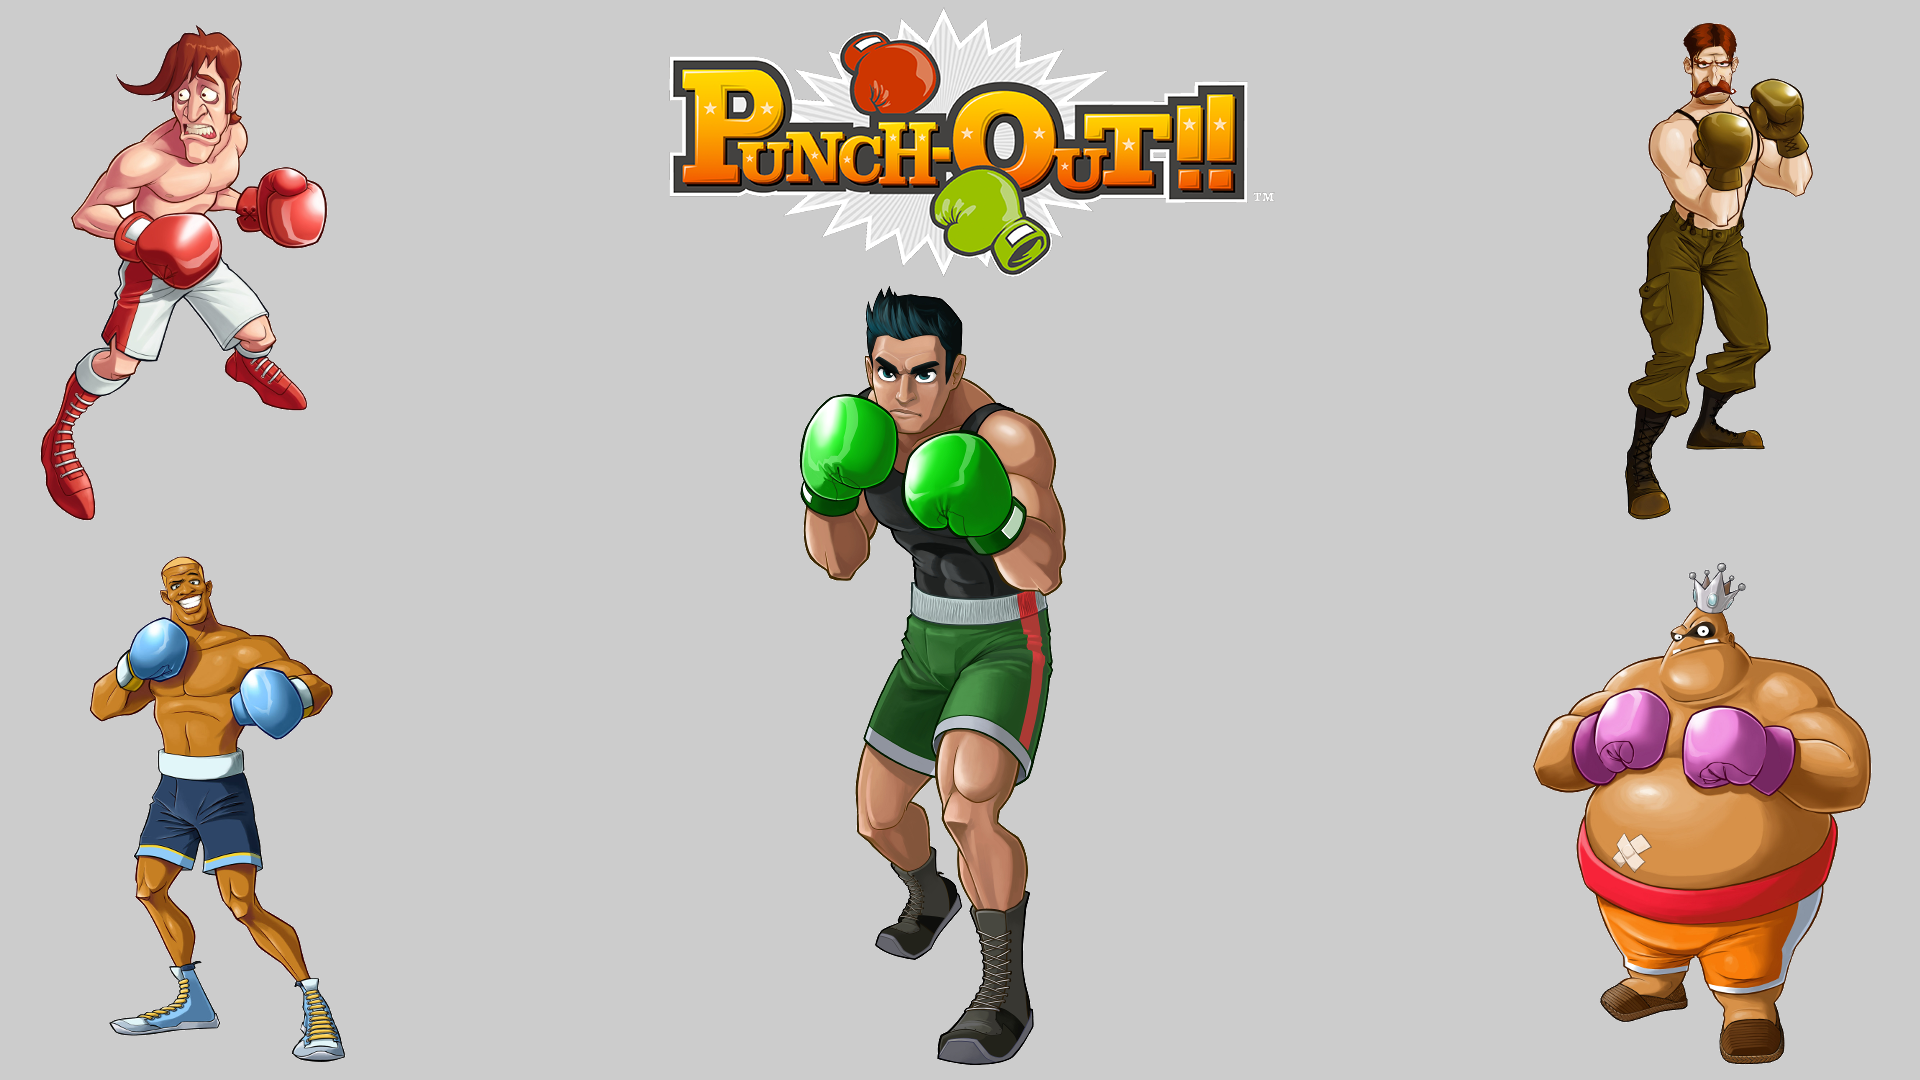 Video Game Punch-Out!! (Wii) HD Wallpaper | Background Image